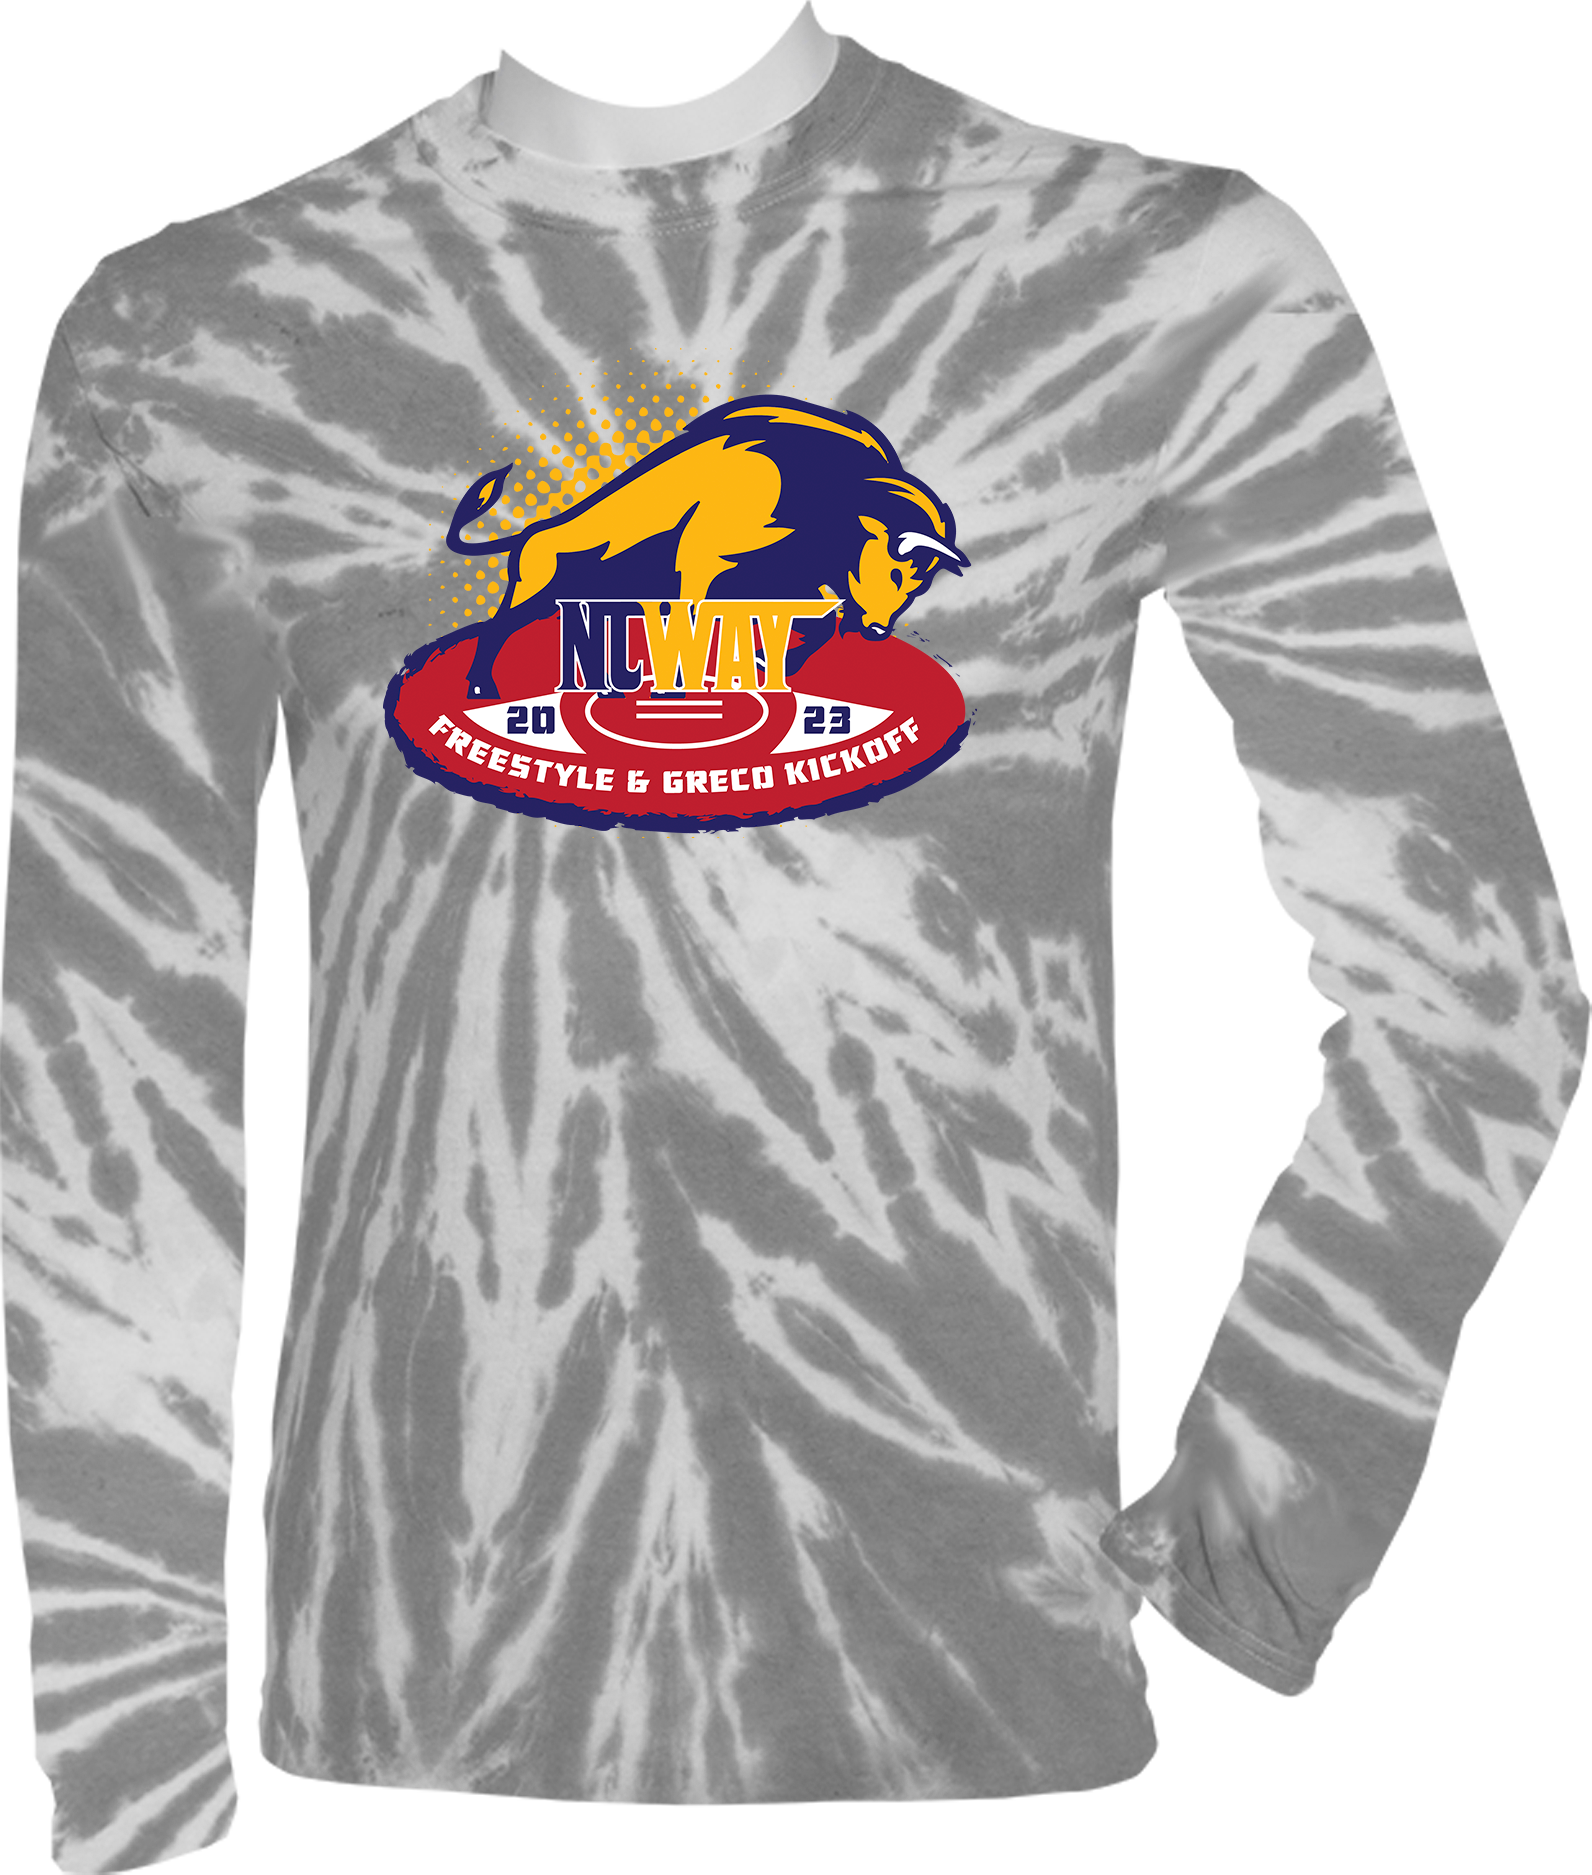 TIE-DYE LONG SLEEVES - 2023 NCWAY Freestyle & Greco Kickoff